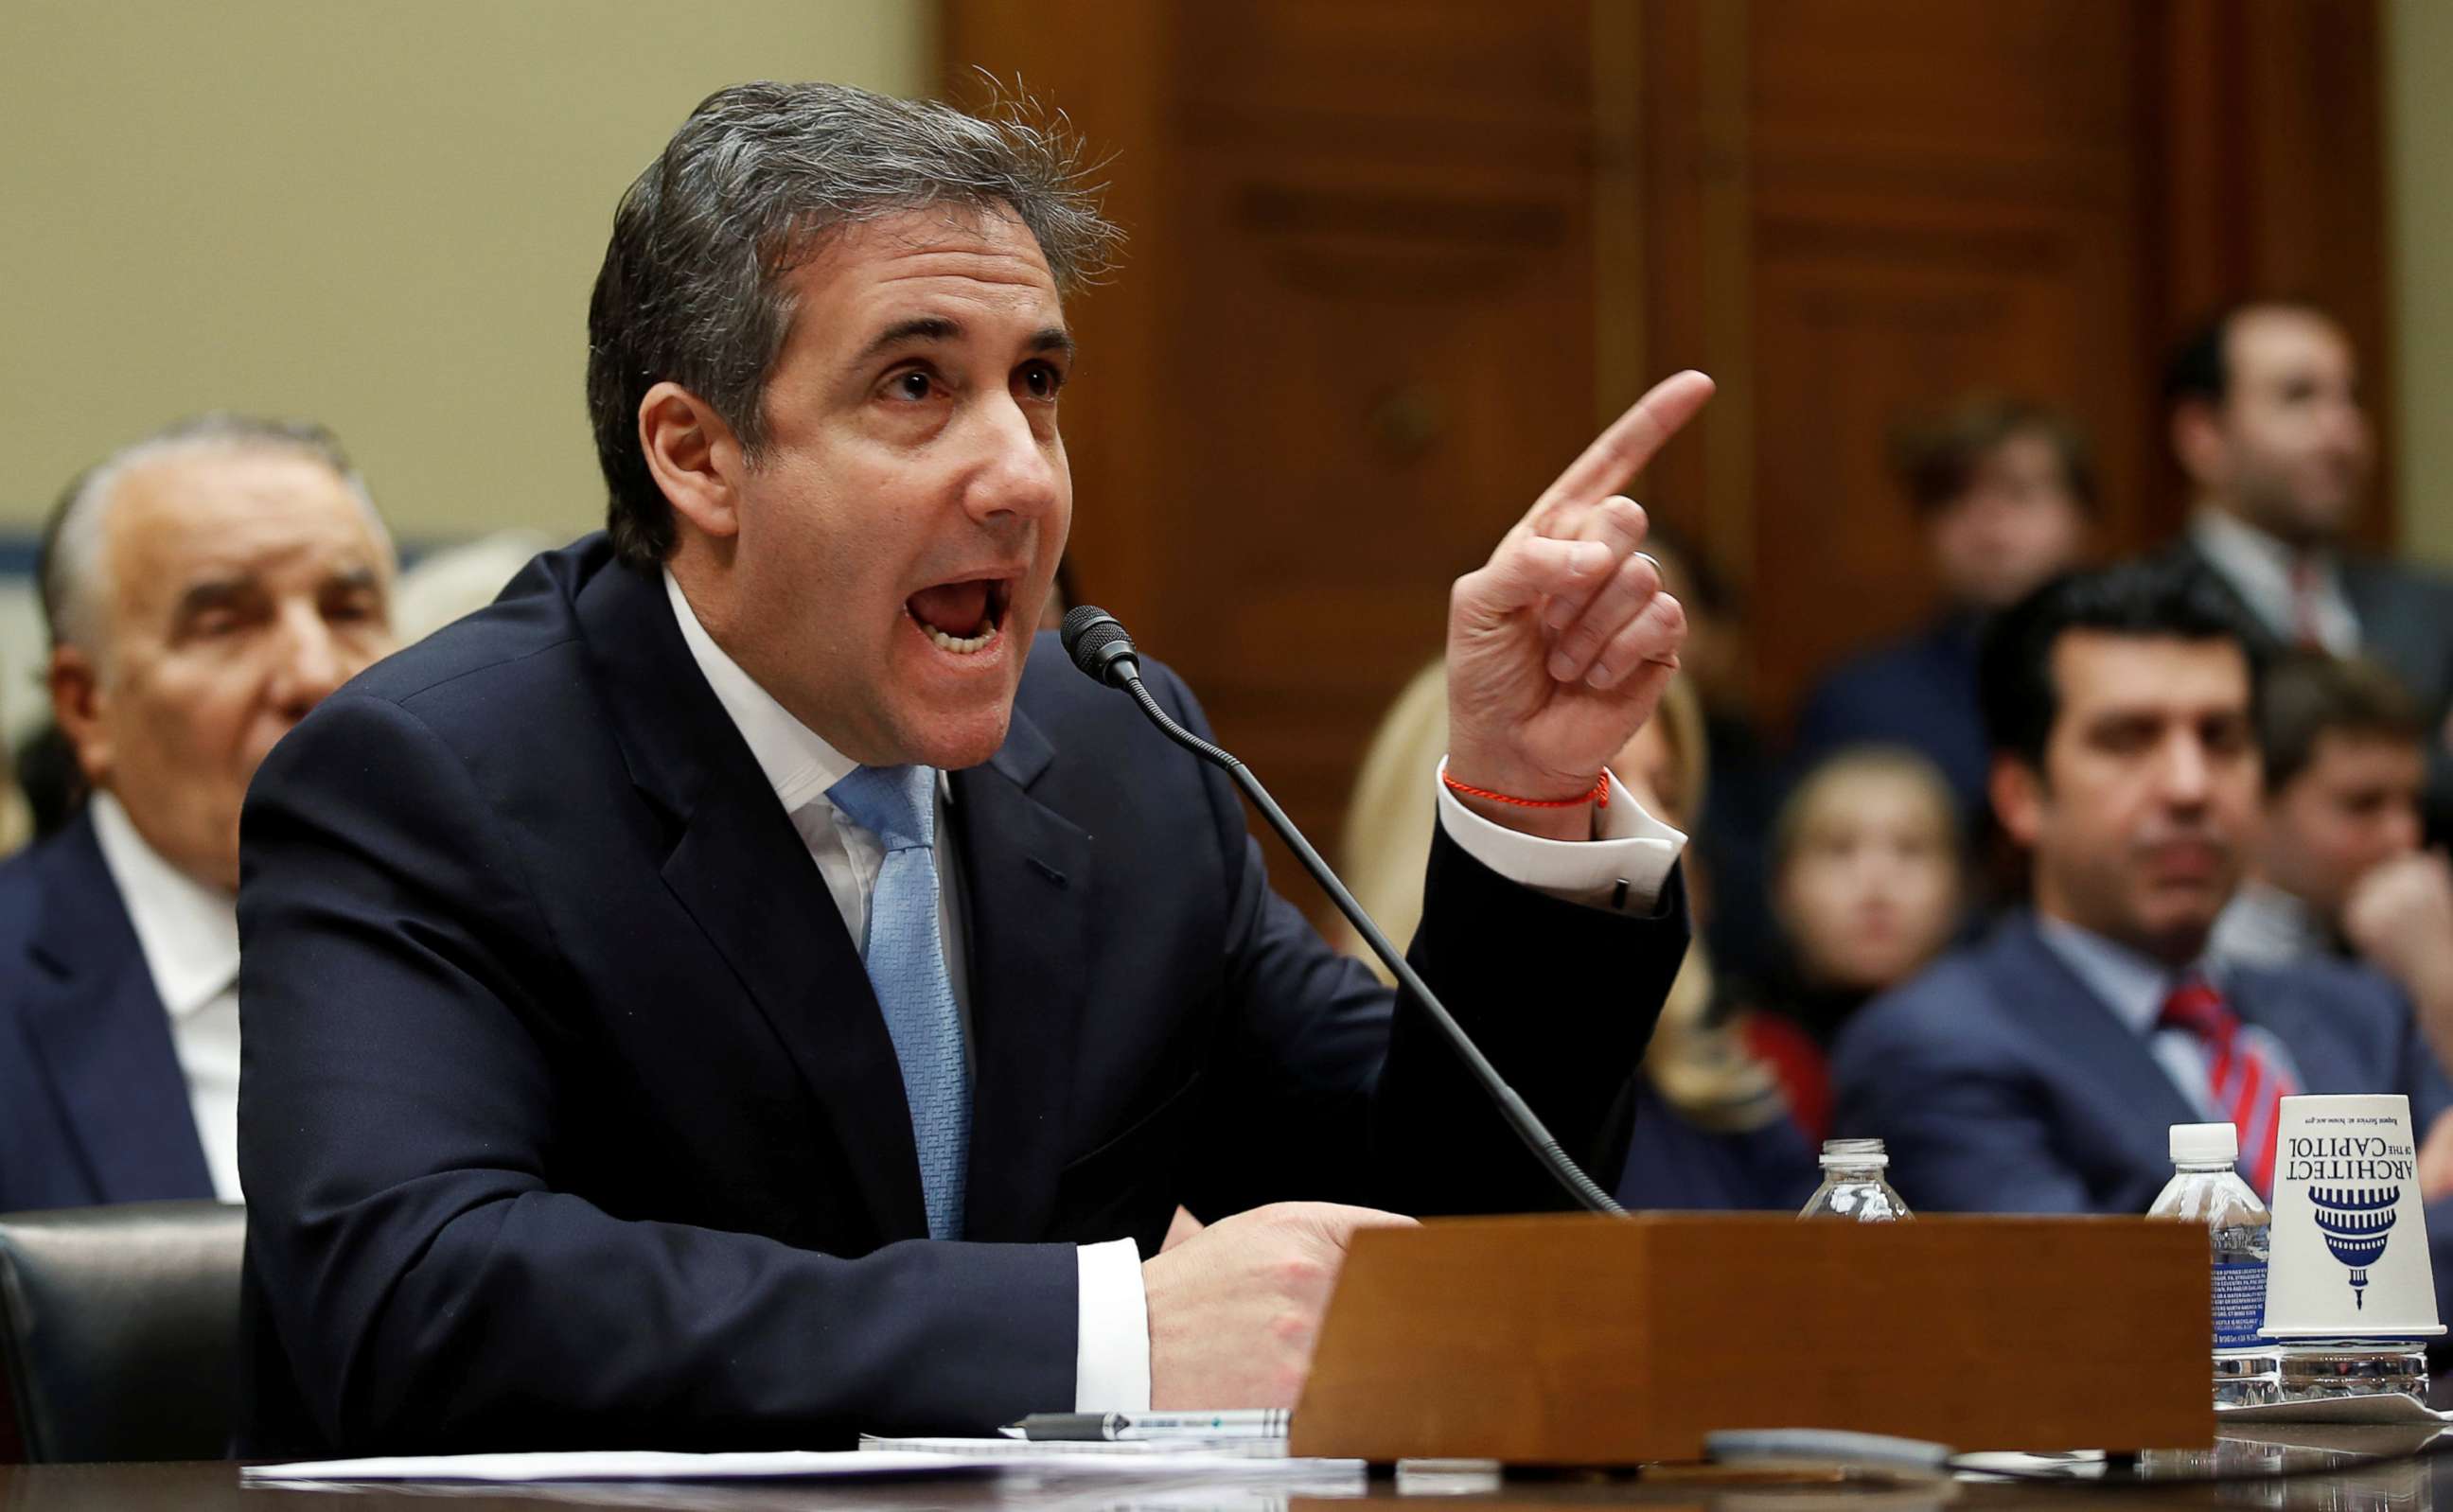 PHOTO: Michael Cohen, the former personal attorney of President Donald Trump, testifies before a House Committee on Oversight and Reform hearing on Capitol Hill in Washington, D.C., Feb. 27, 2019.